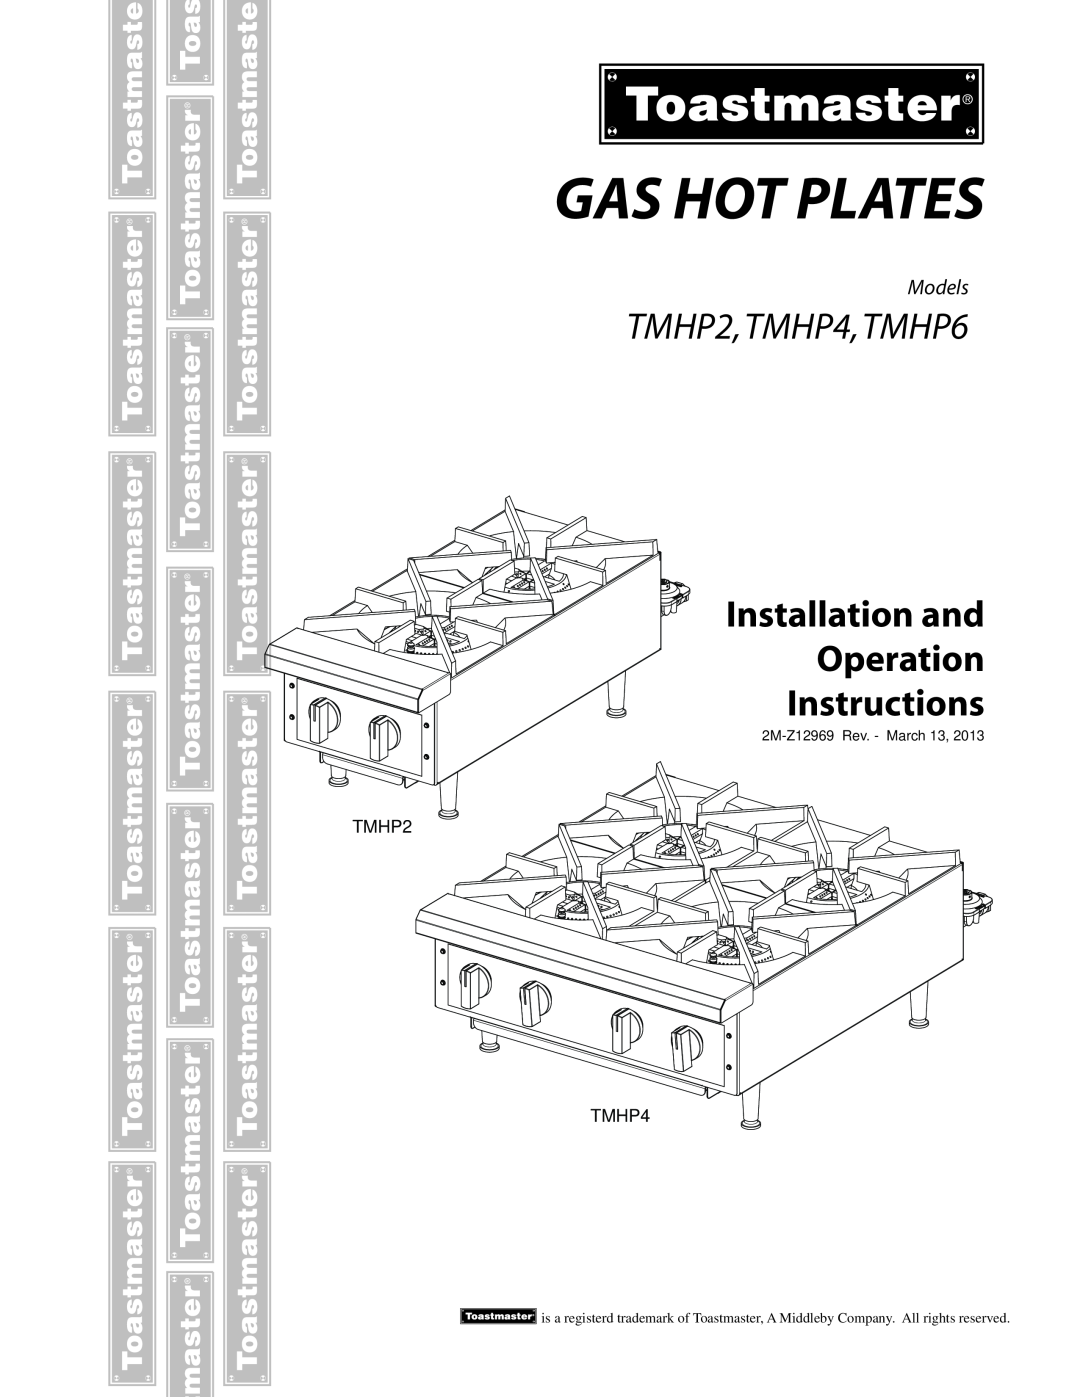 Toastmaster THMP2 manual Gas Hot Plates, TMHP2,TMHP4,TMHP6, Installation and Operation Instructions, Models 